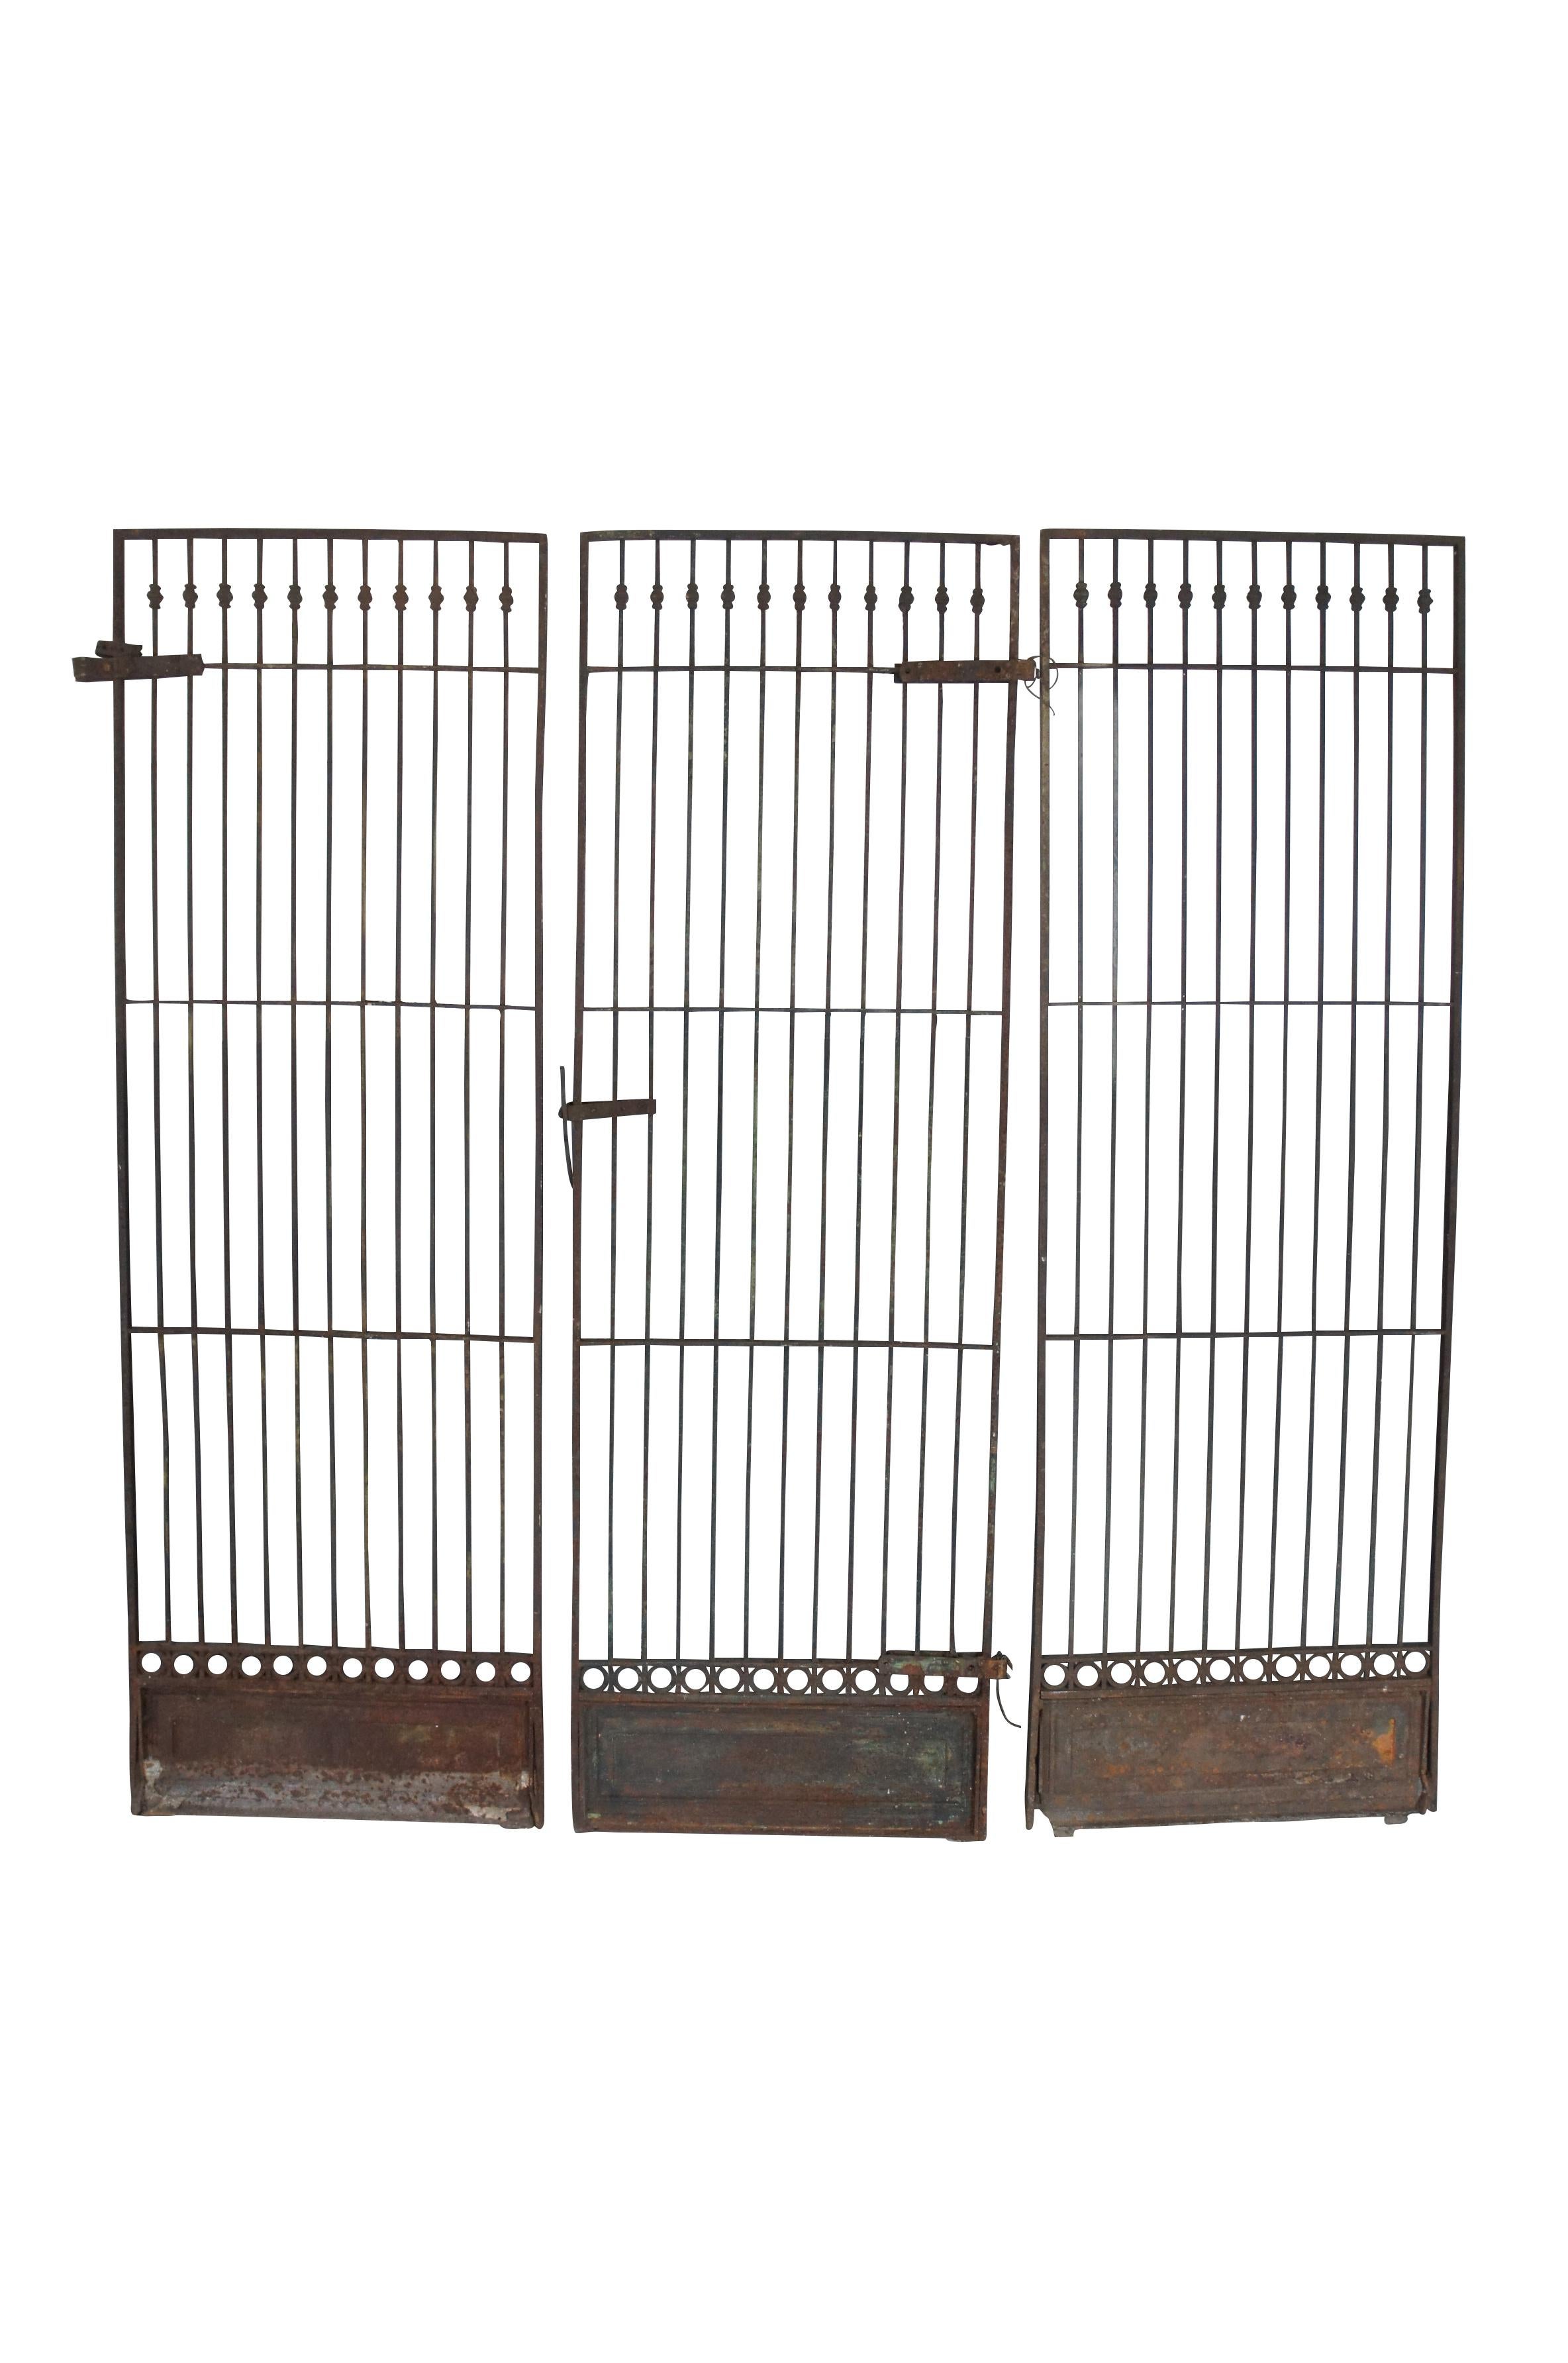 Intriguing set of antique Victorian Era reclaimed architectural wrought iron garden fence grates / gates. 37 available, sold individually. Made from Iron with ornate Neoclassical styling. Each door or panel features squared off vertical posts offset